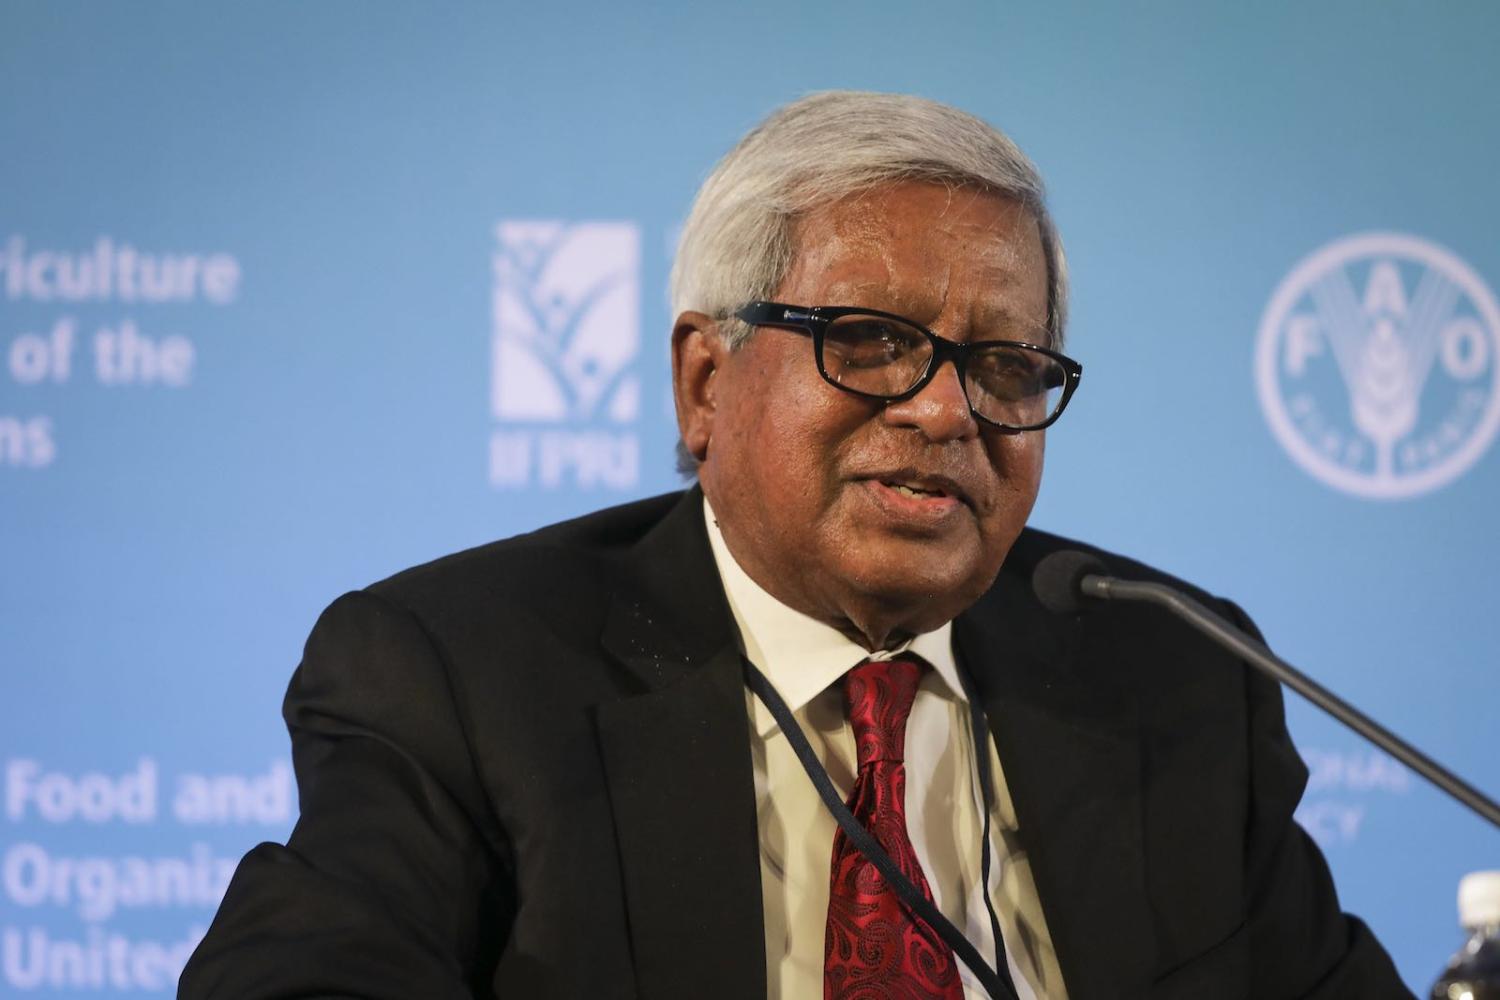 Sir Fazle Hasan Abed, founder of BRAC, in 2018 (Photo: Amanda Mustard for FAO/IFPRI-Images/Flickr)